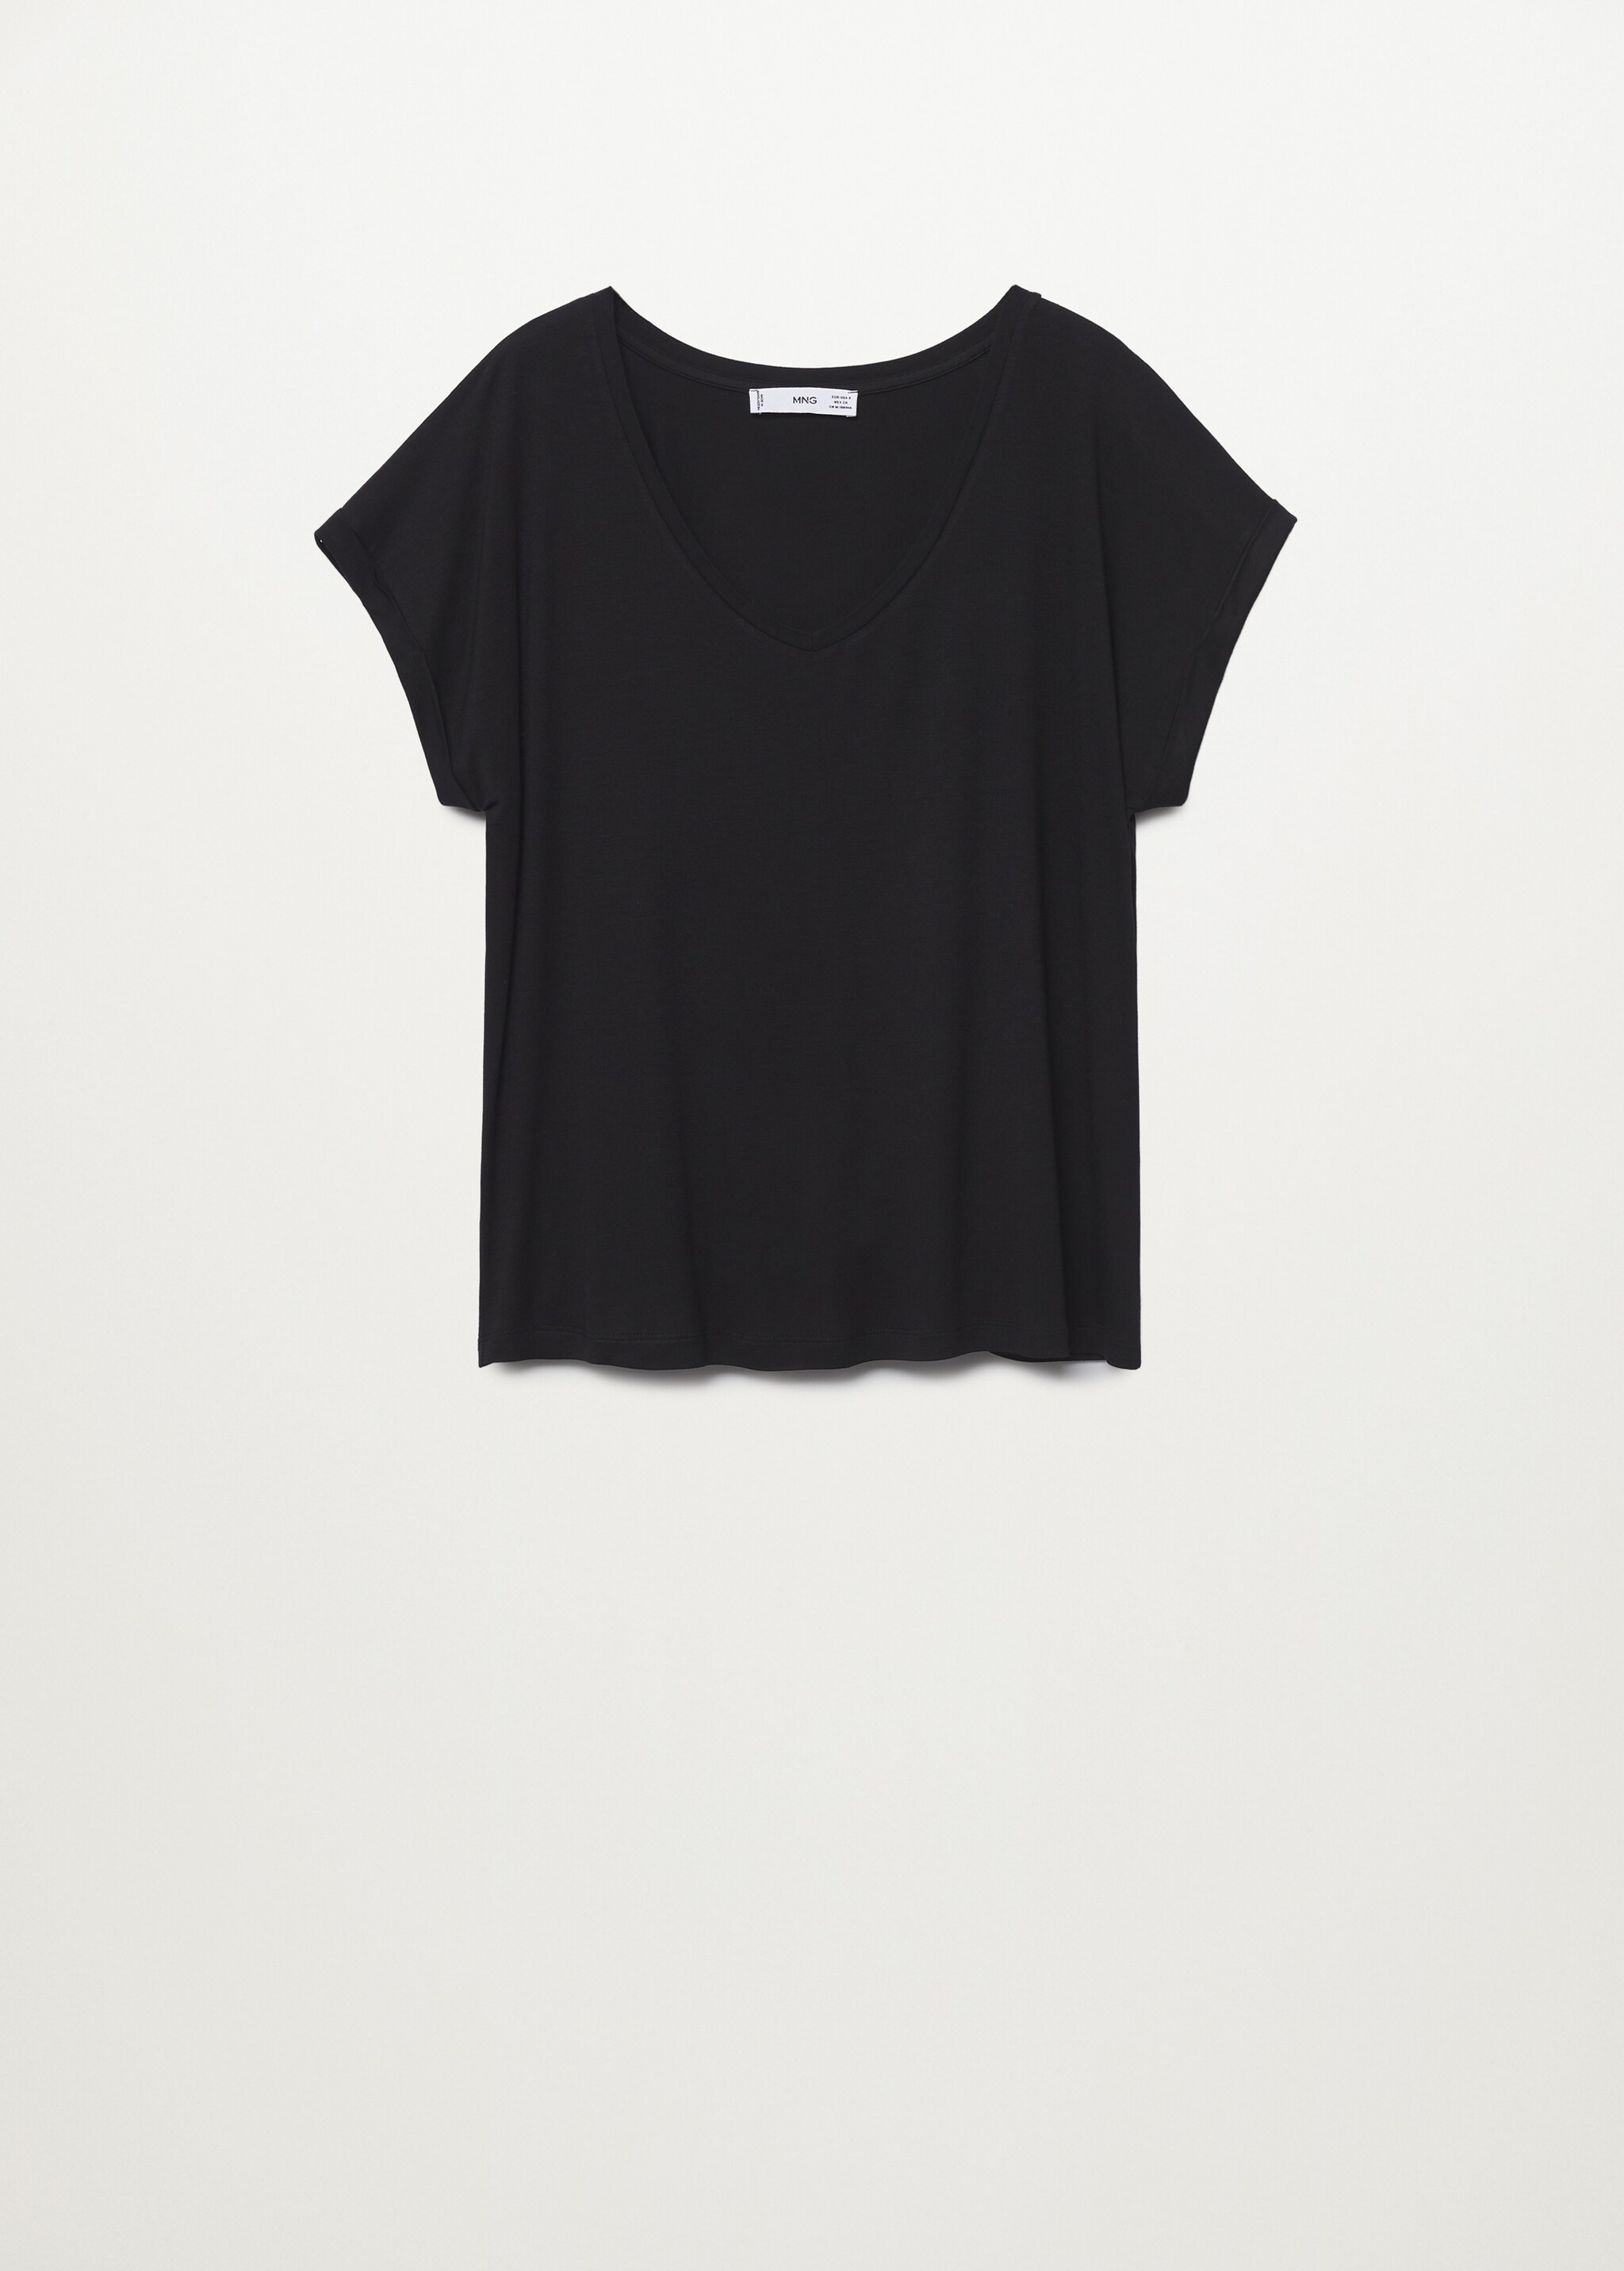 V-neckline essential T-shirt - Article without model